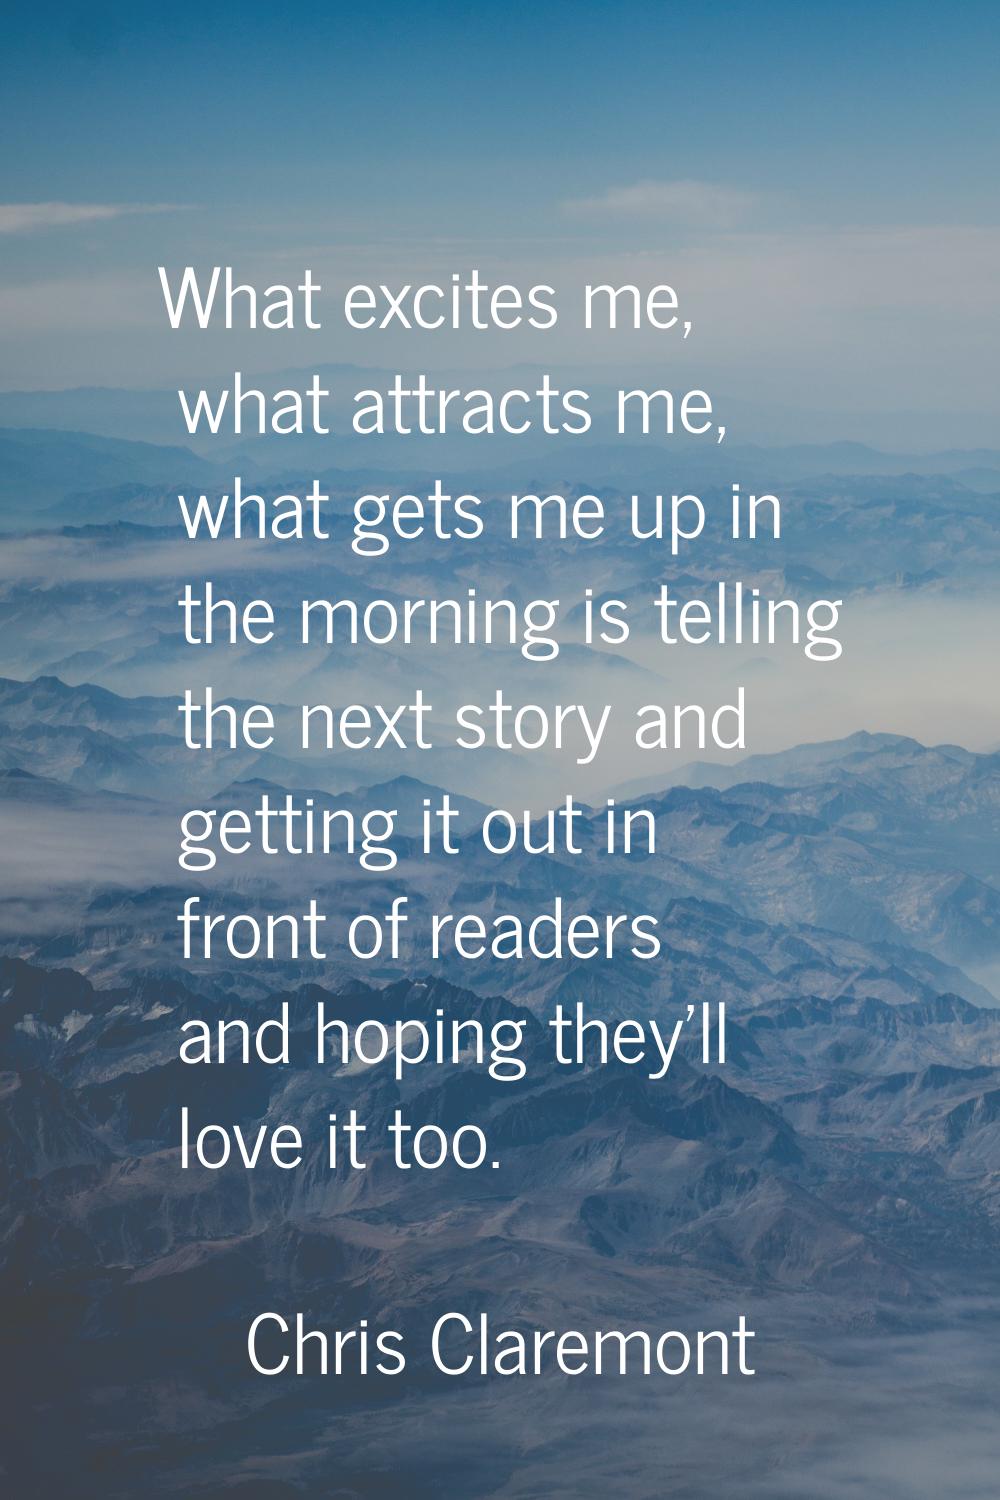 What excites me, what attracts me, what gets me up in the morning is telling the next story and get